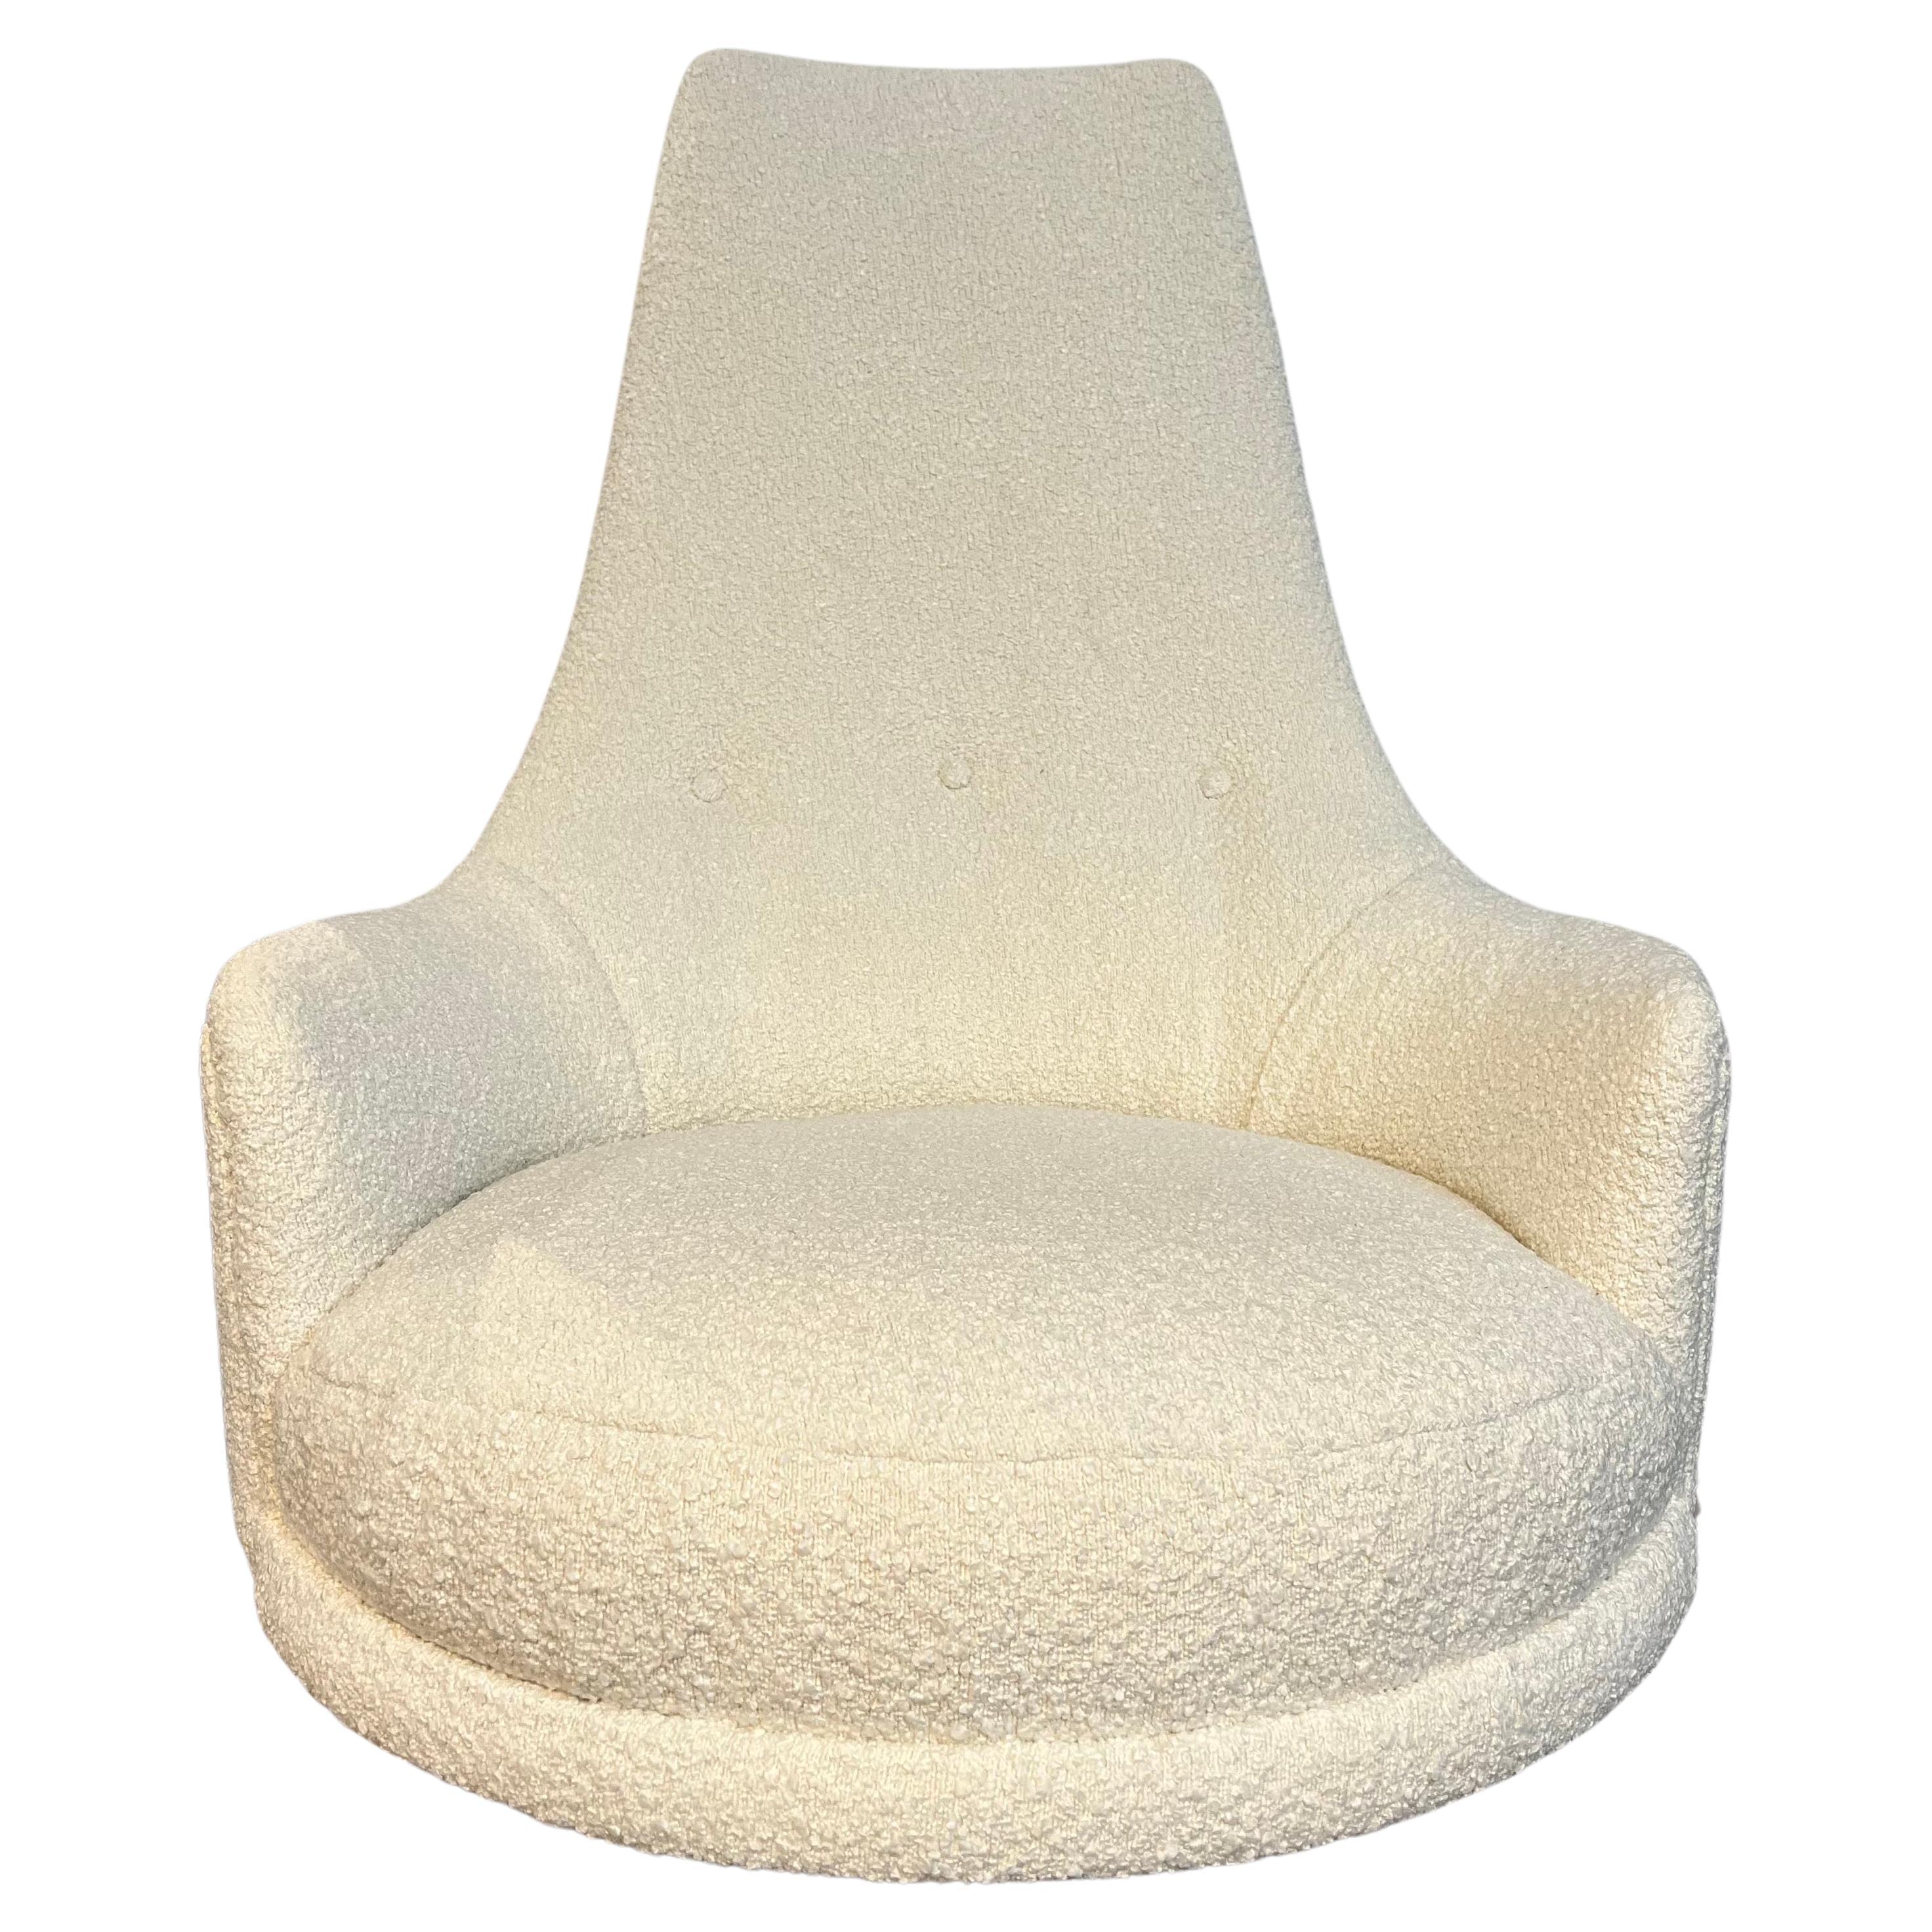 Gorgeous newly upholstered in elegant ivory boucle fabric high back swivel chair.
Designed by Adrian Pearsall for Craft Associates in PA circa 1960's. Why not own the best.